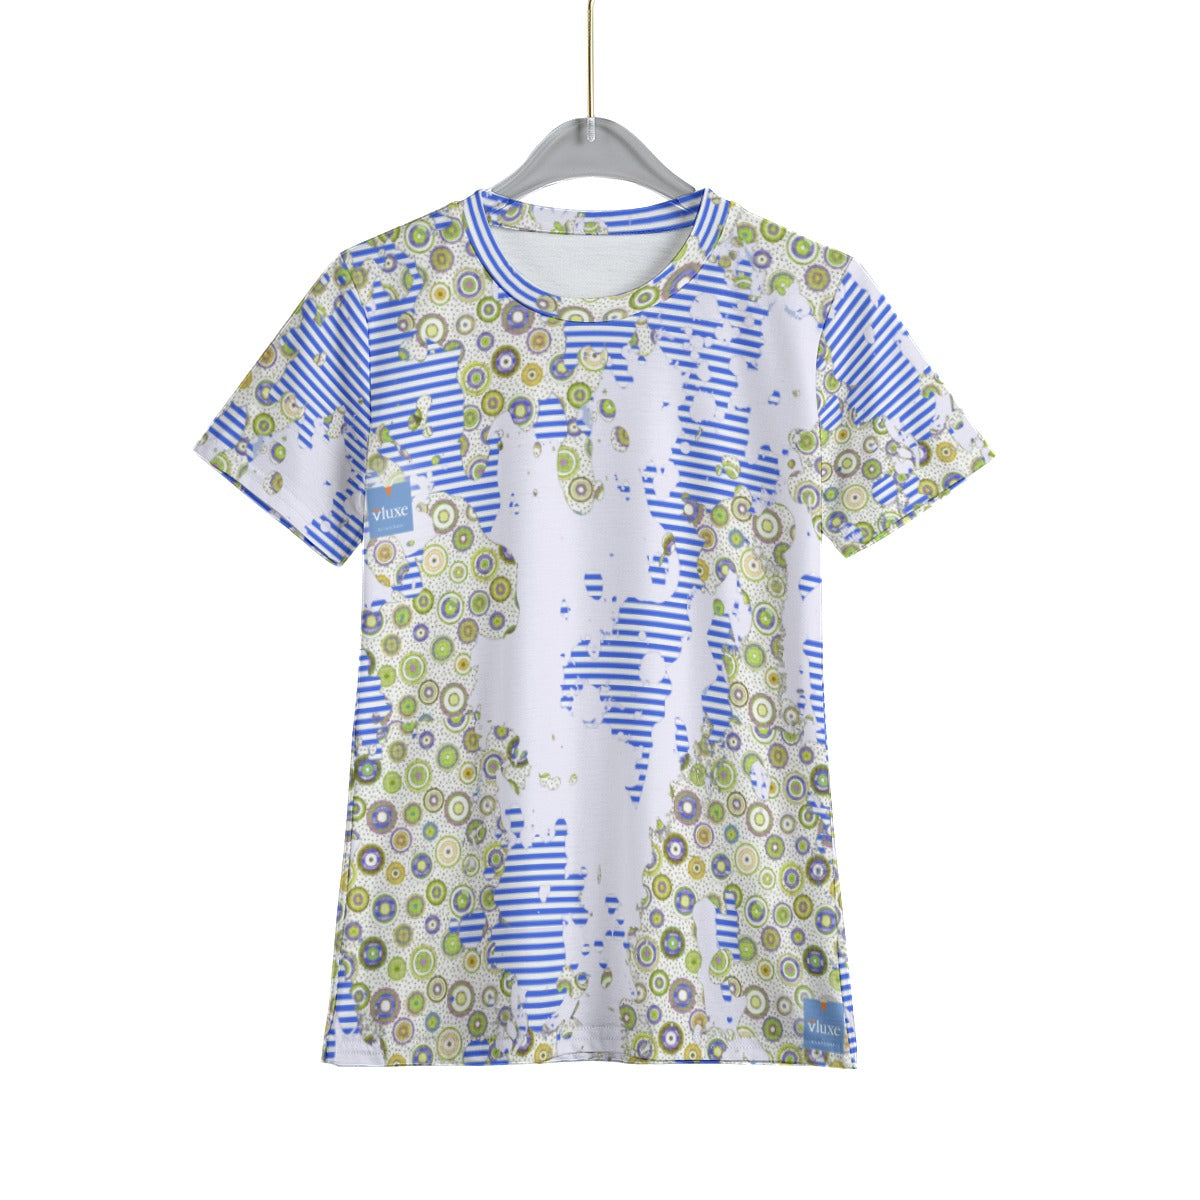 Fashionflage All-Over Print Kid's T-Shirt